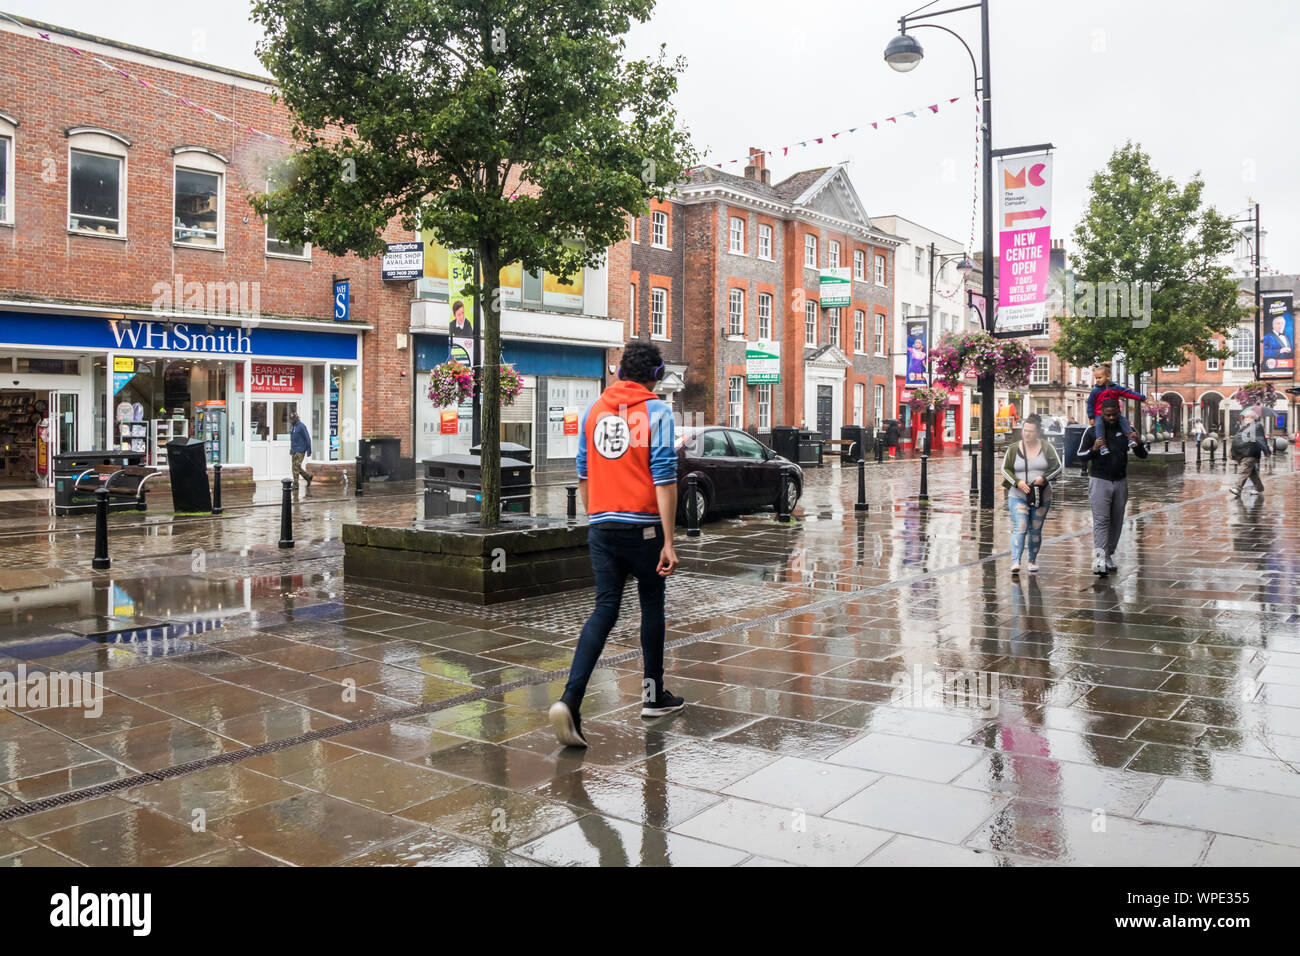 High Wycombe, Engalnd - August 14th 2019: People walking down the High Street in the rain. It frequently rains in the summer. Stock Photo